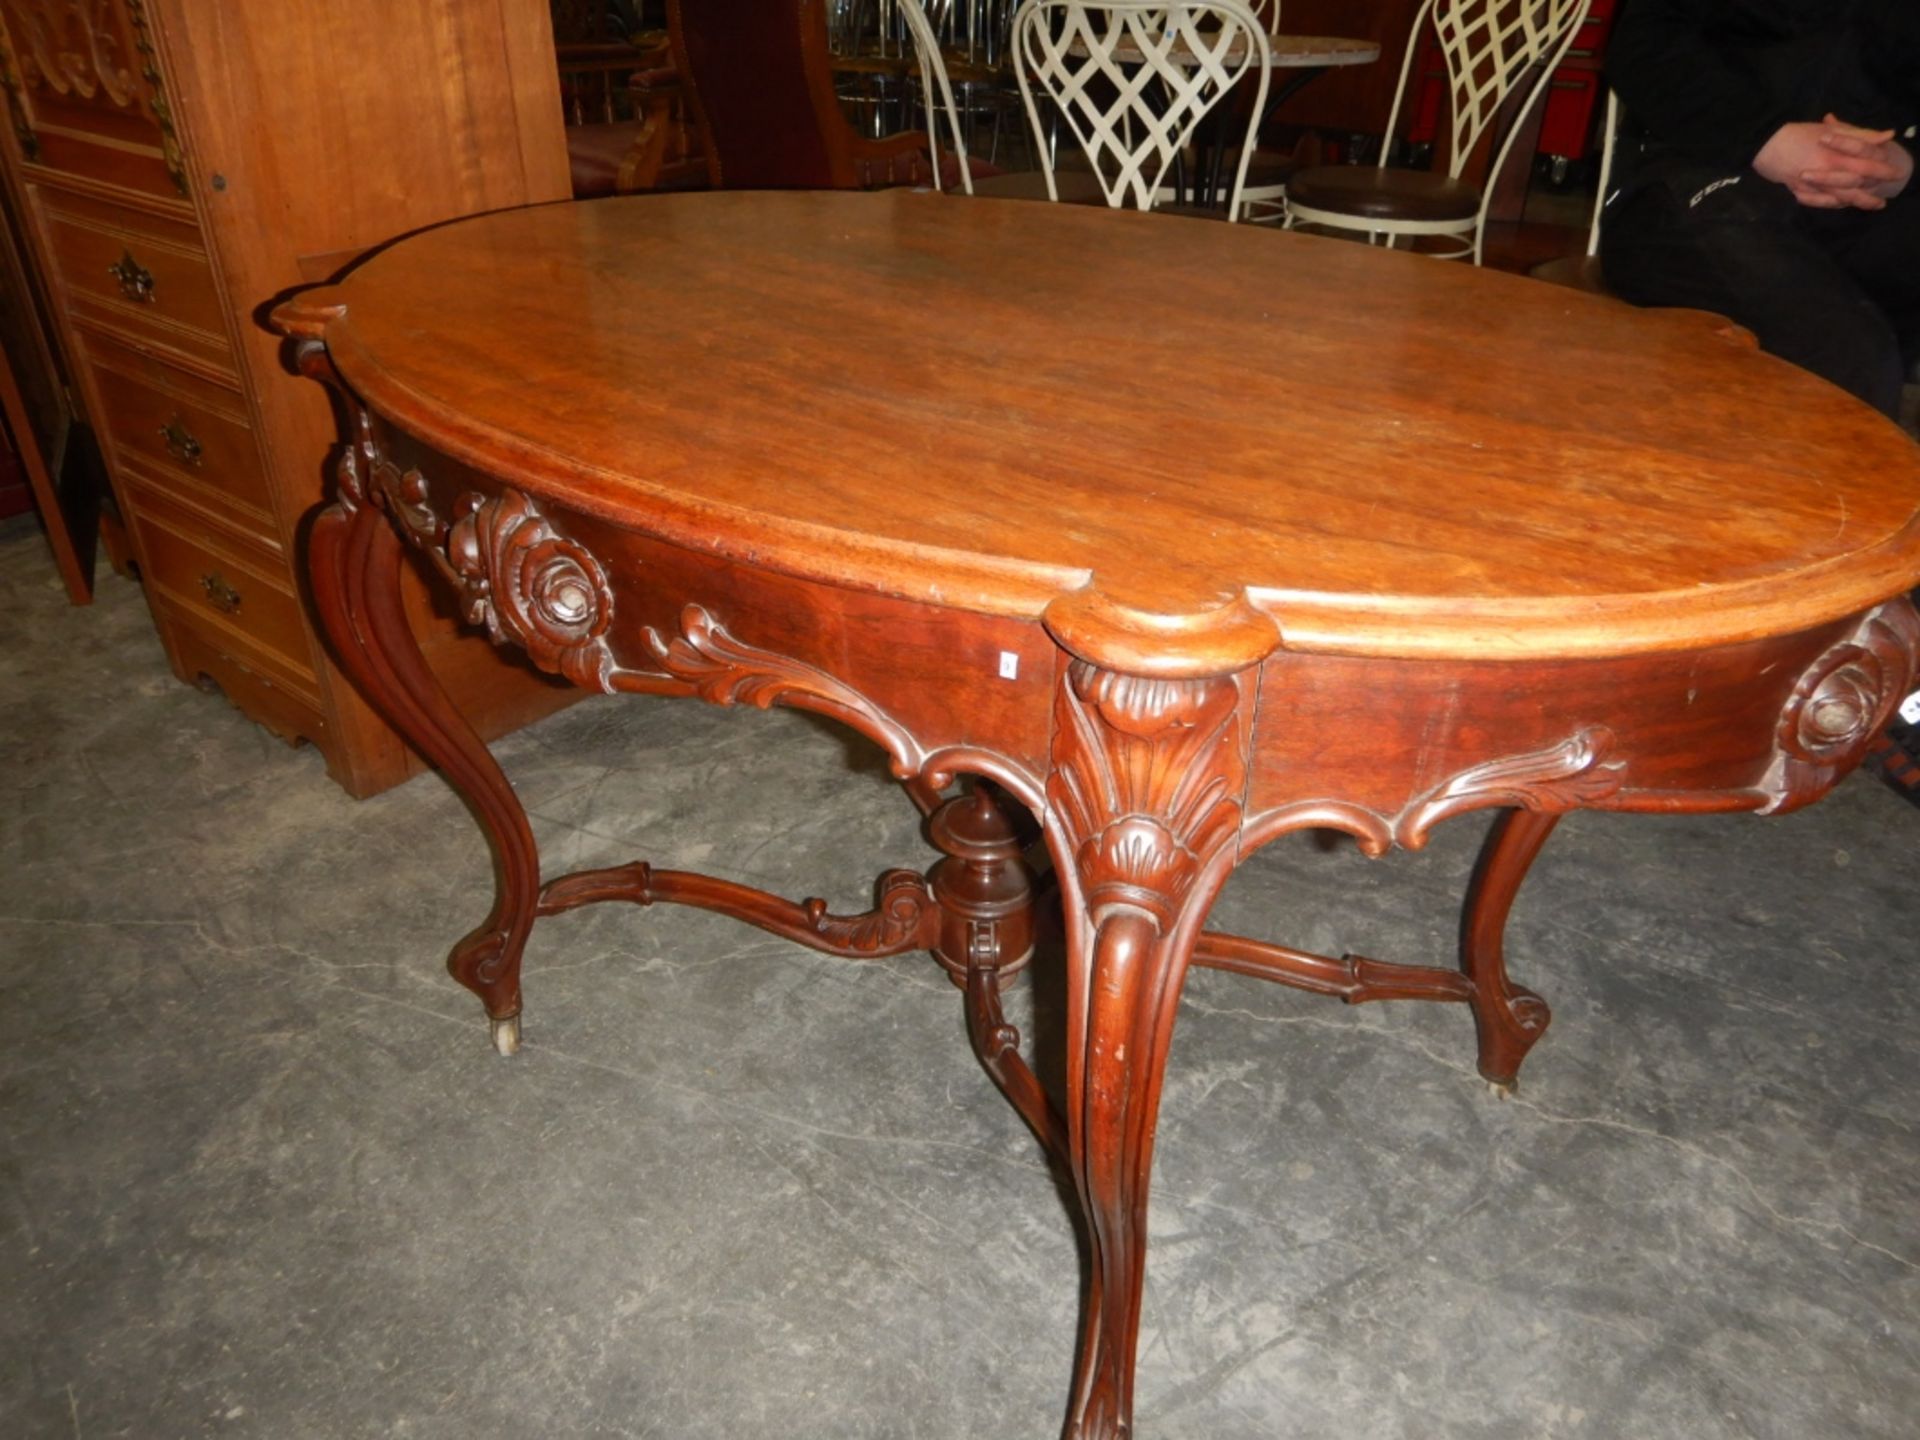 ANTIQUE PARLOR TABLE - BIRD'S EYE MAPLE - Image 8 of 9